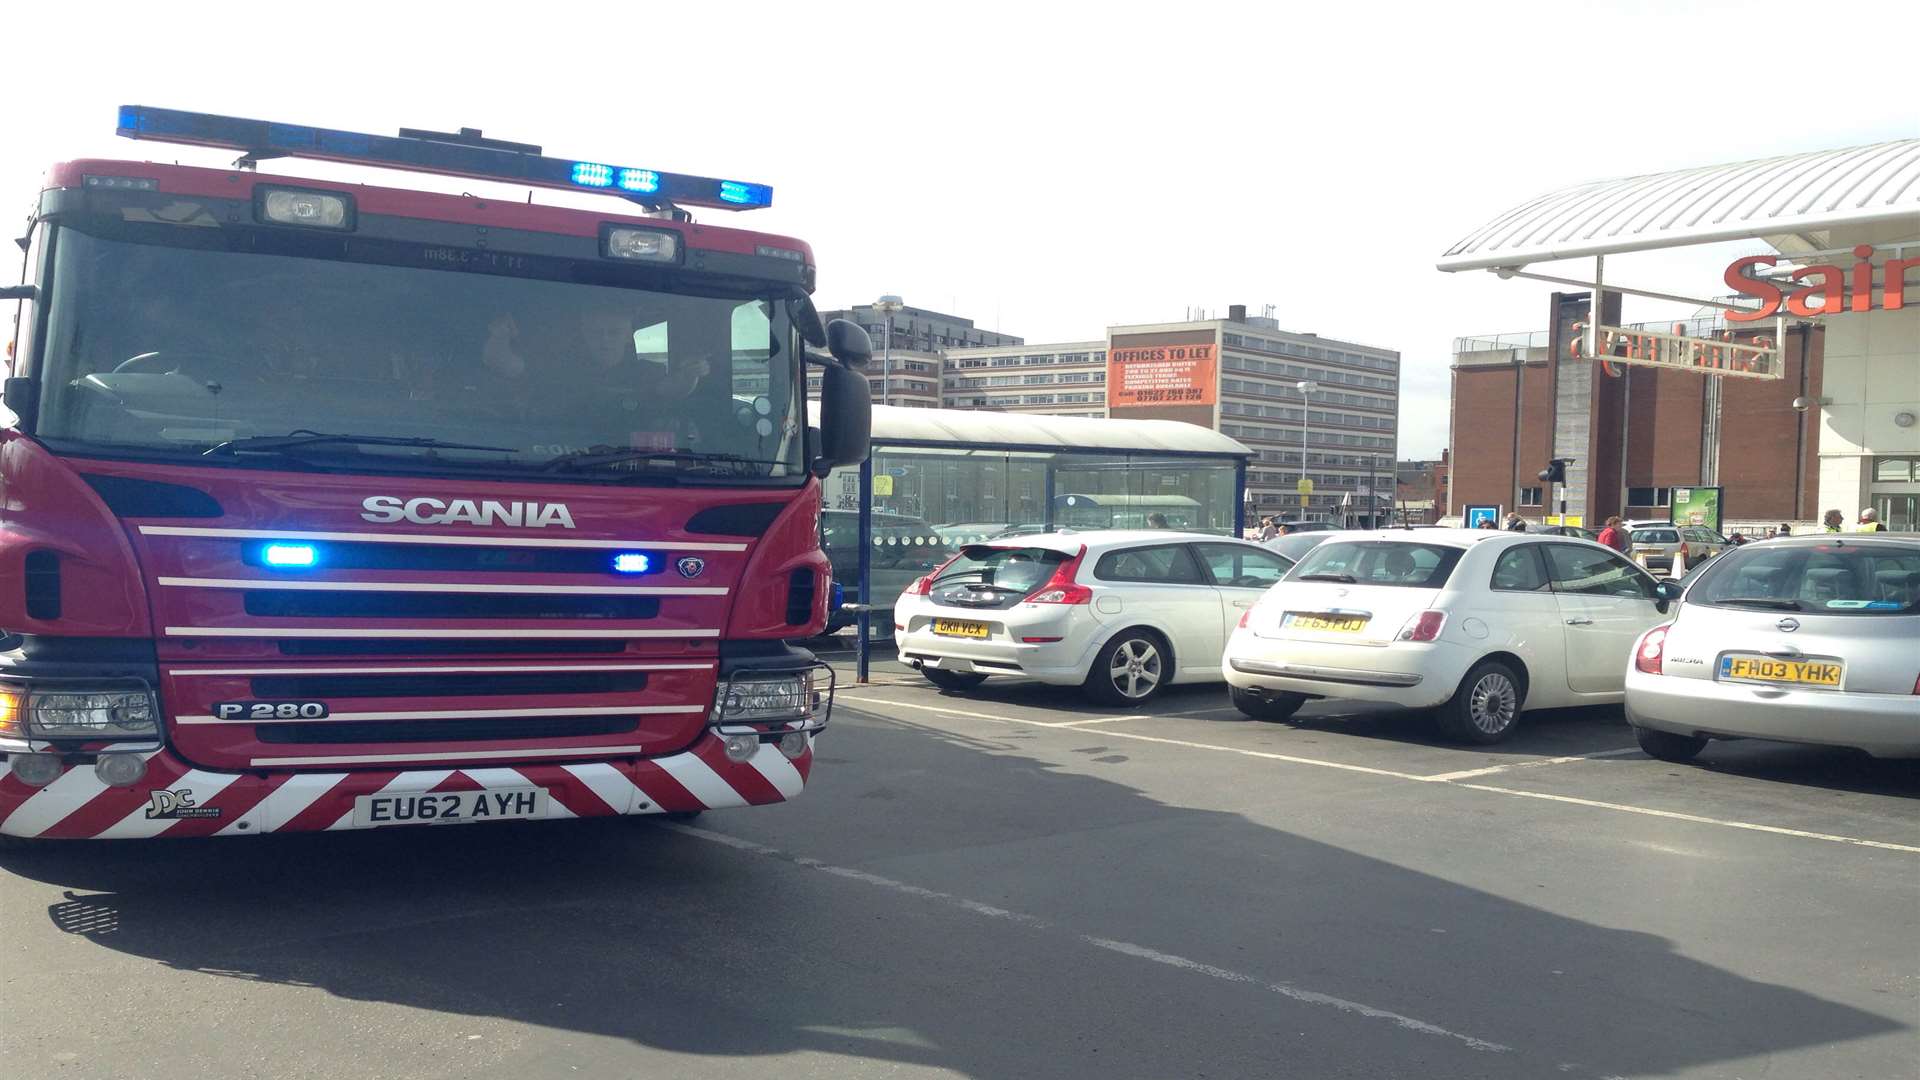 Fire crews were called to the supermarket during a previous incident in Romney Place